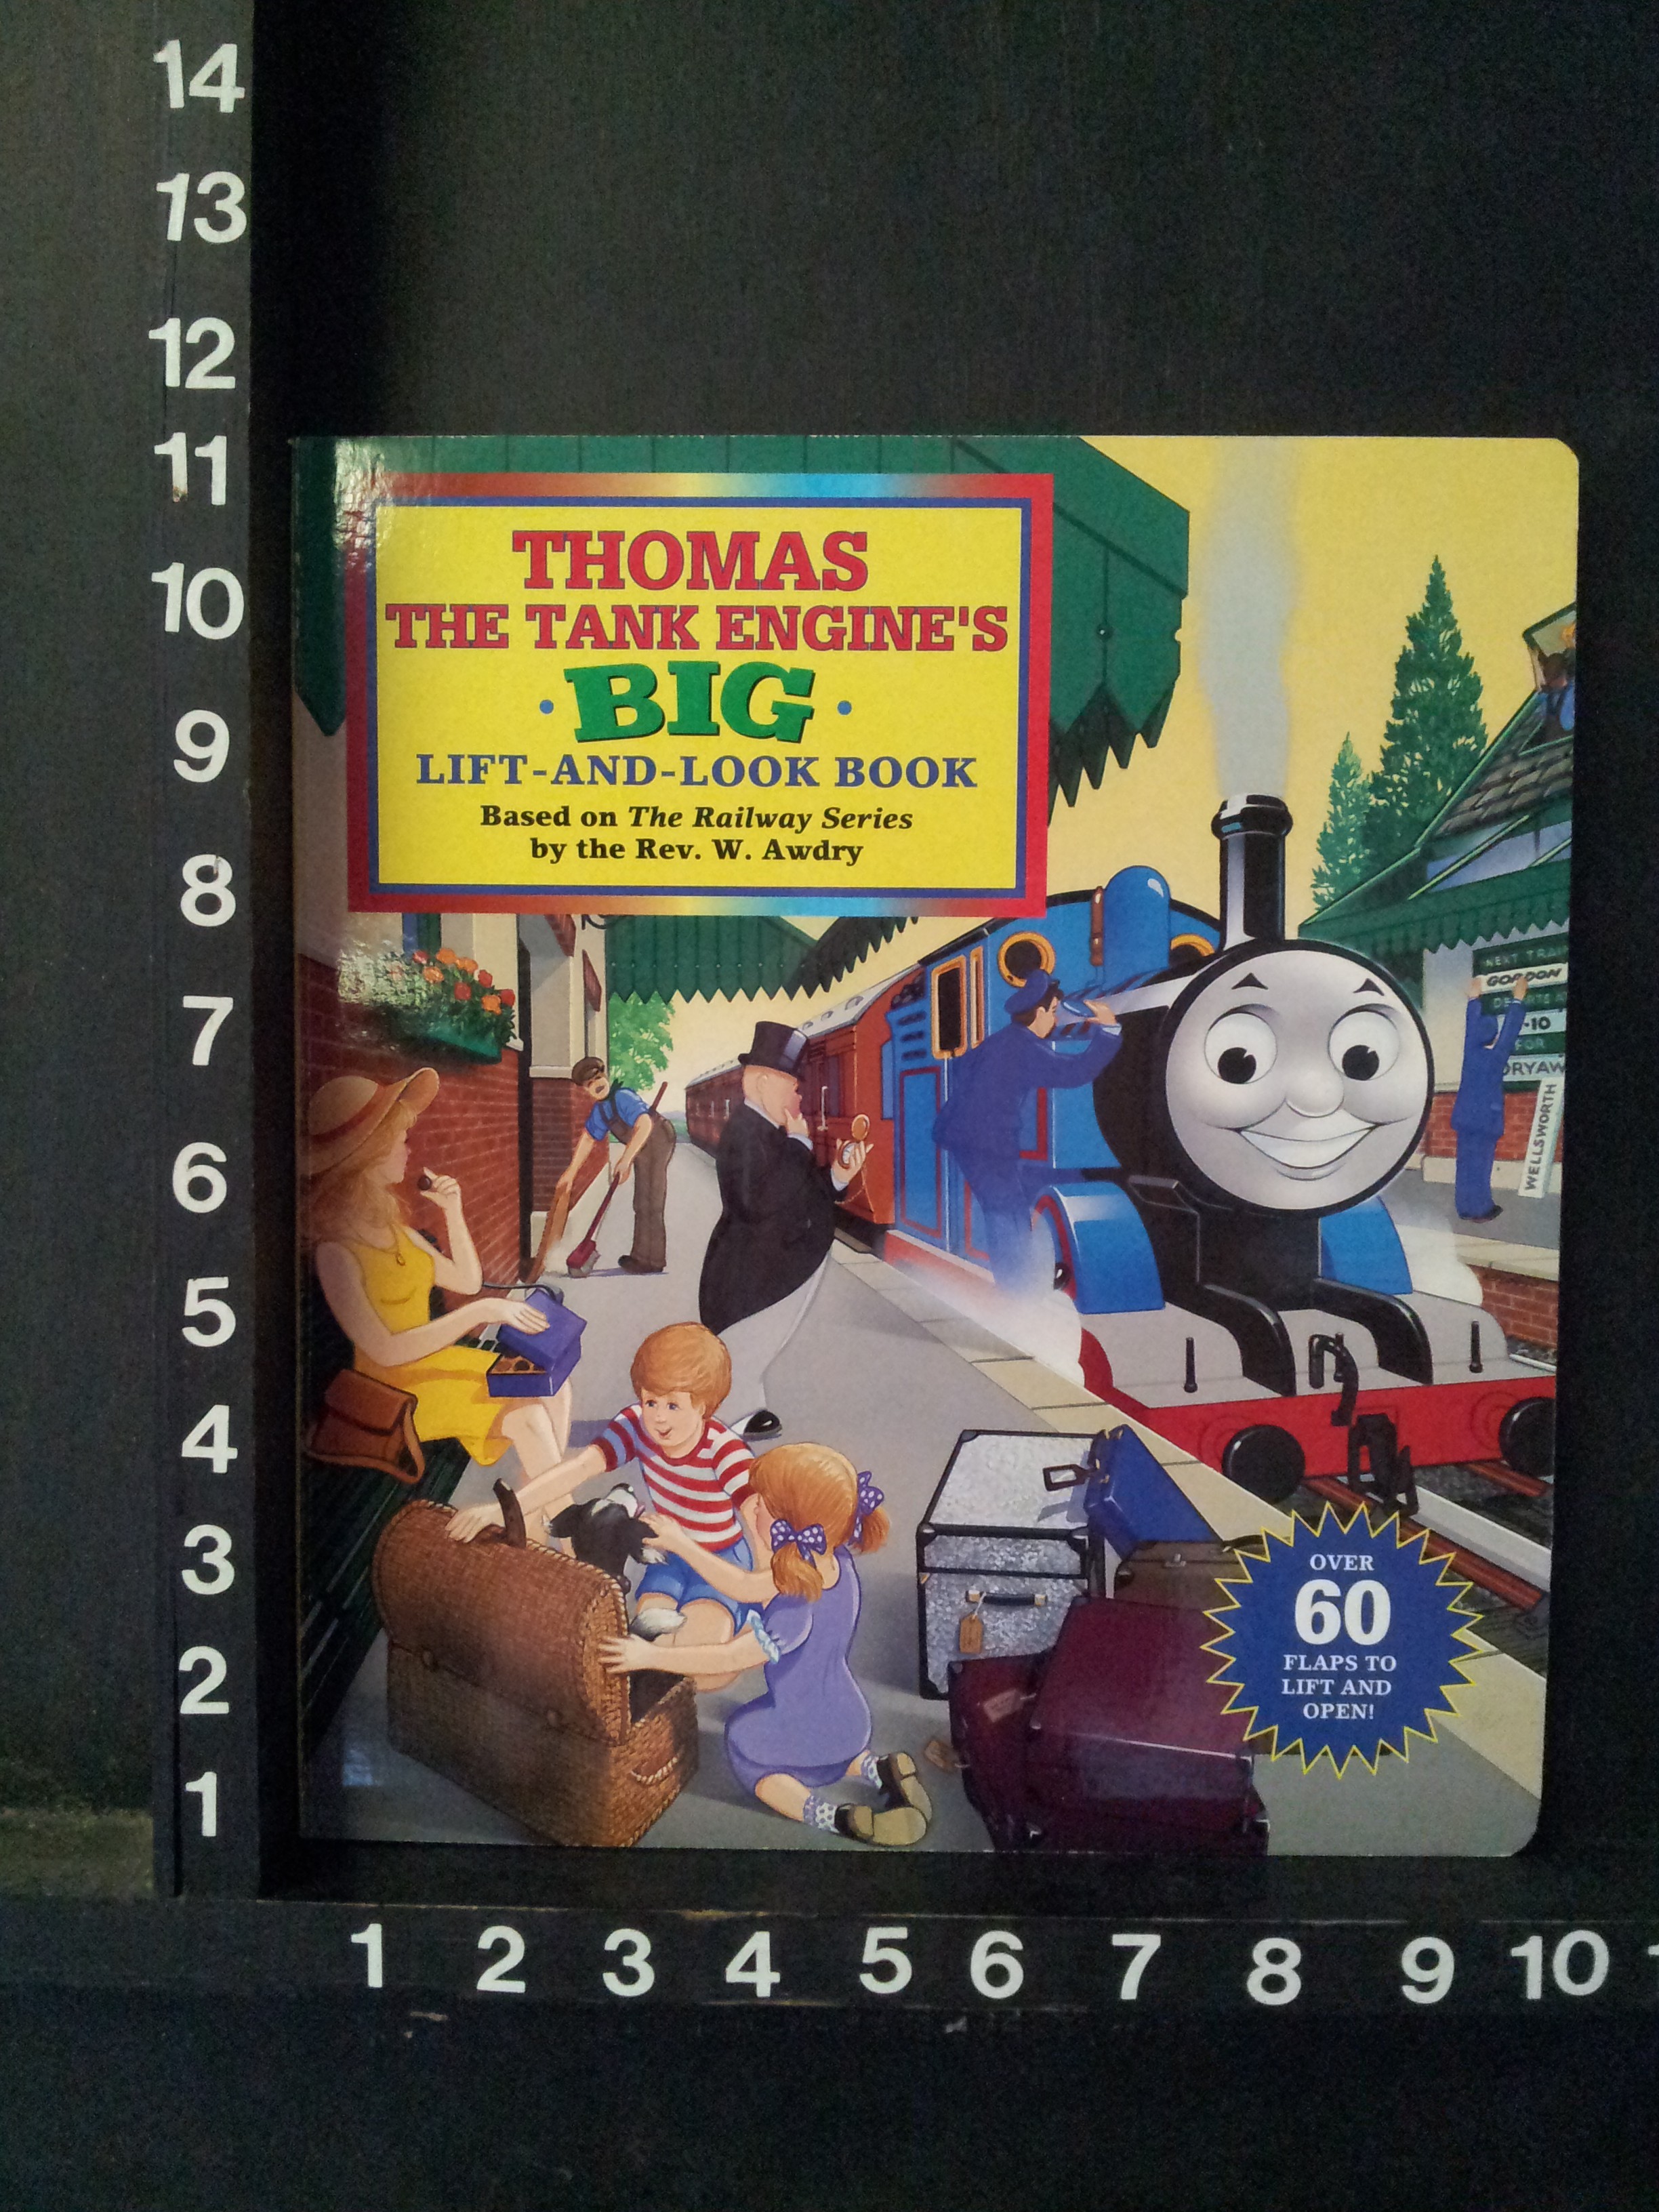 Thomas the Tank Engine's Big Lift – And – Look Book – Warehouse Books